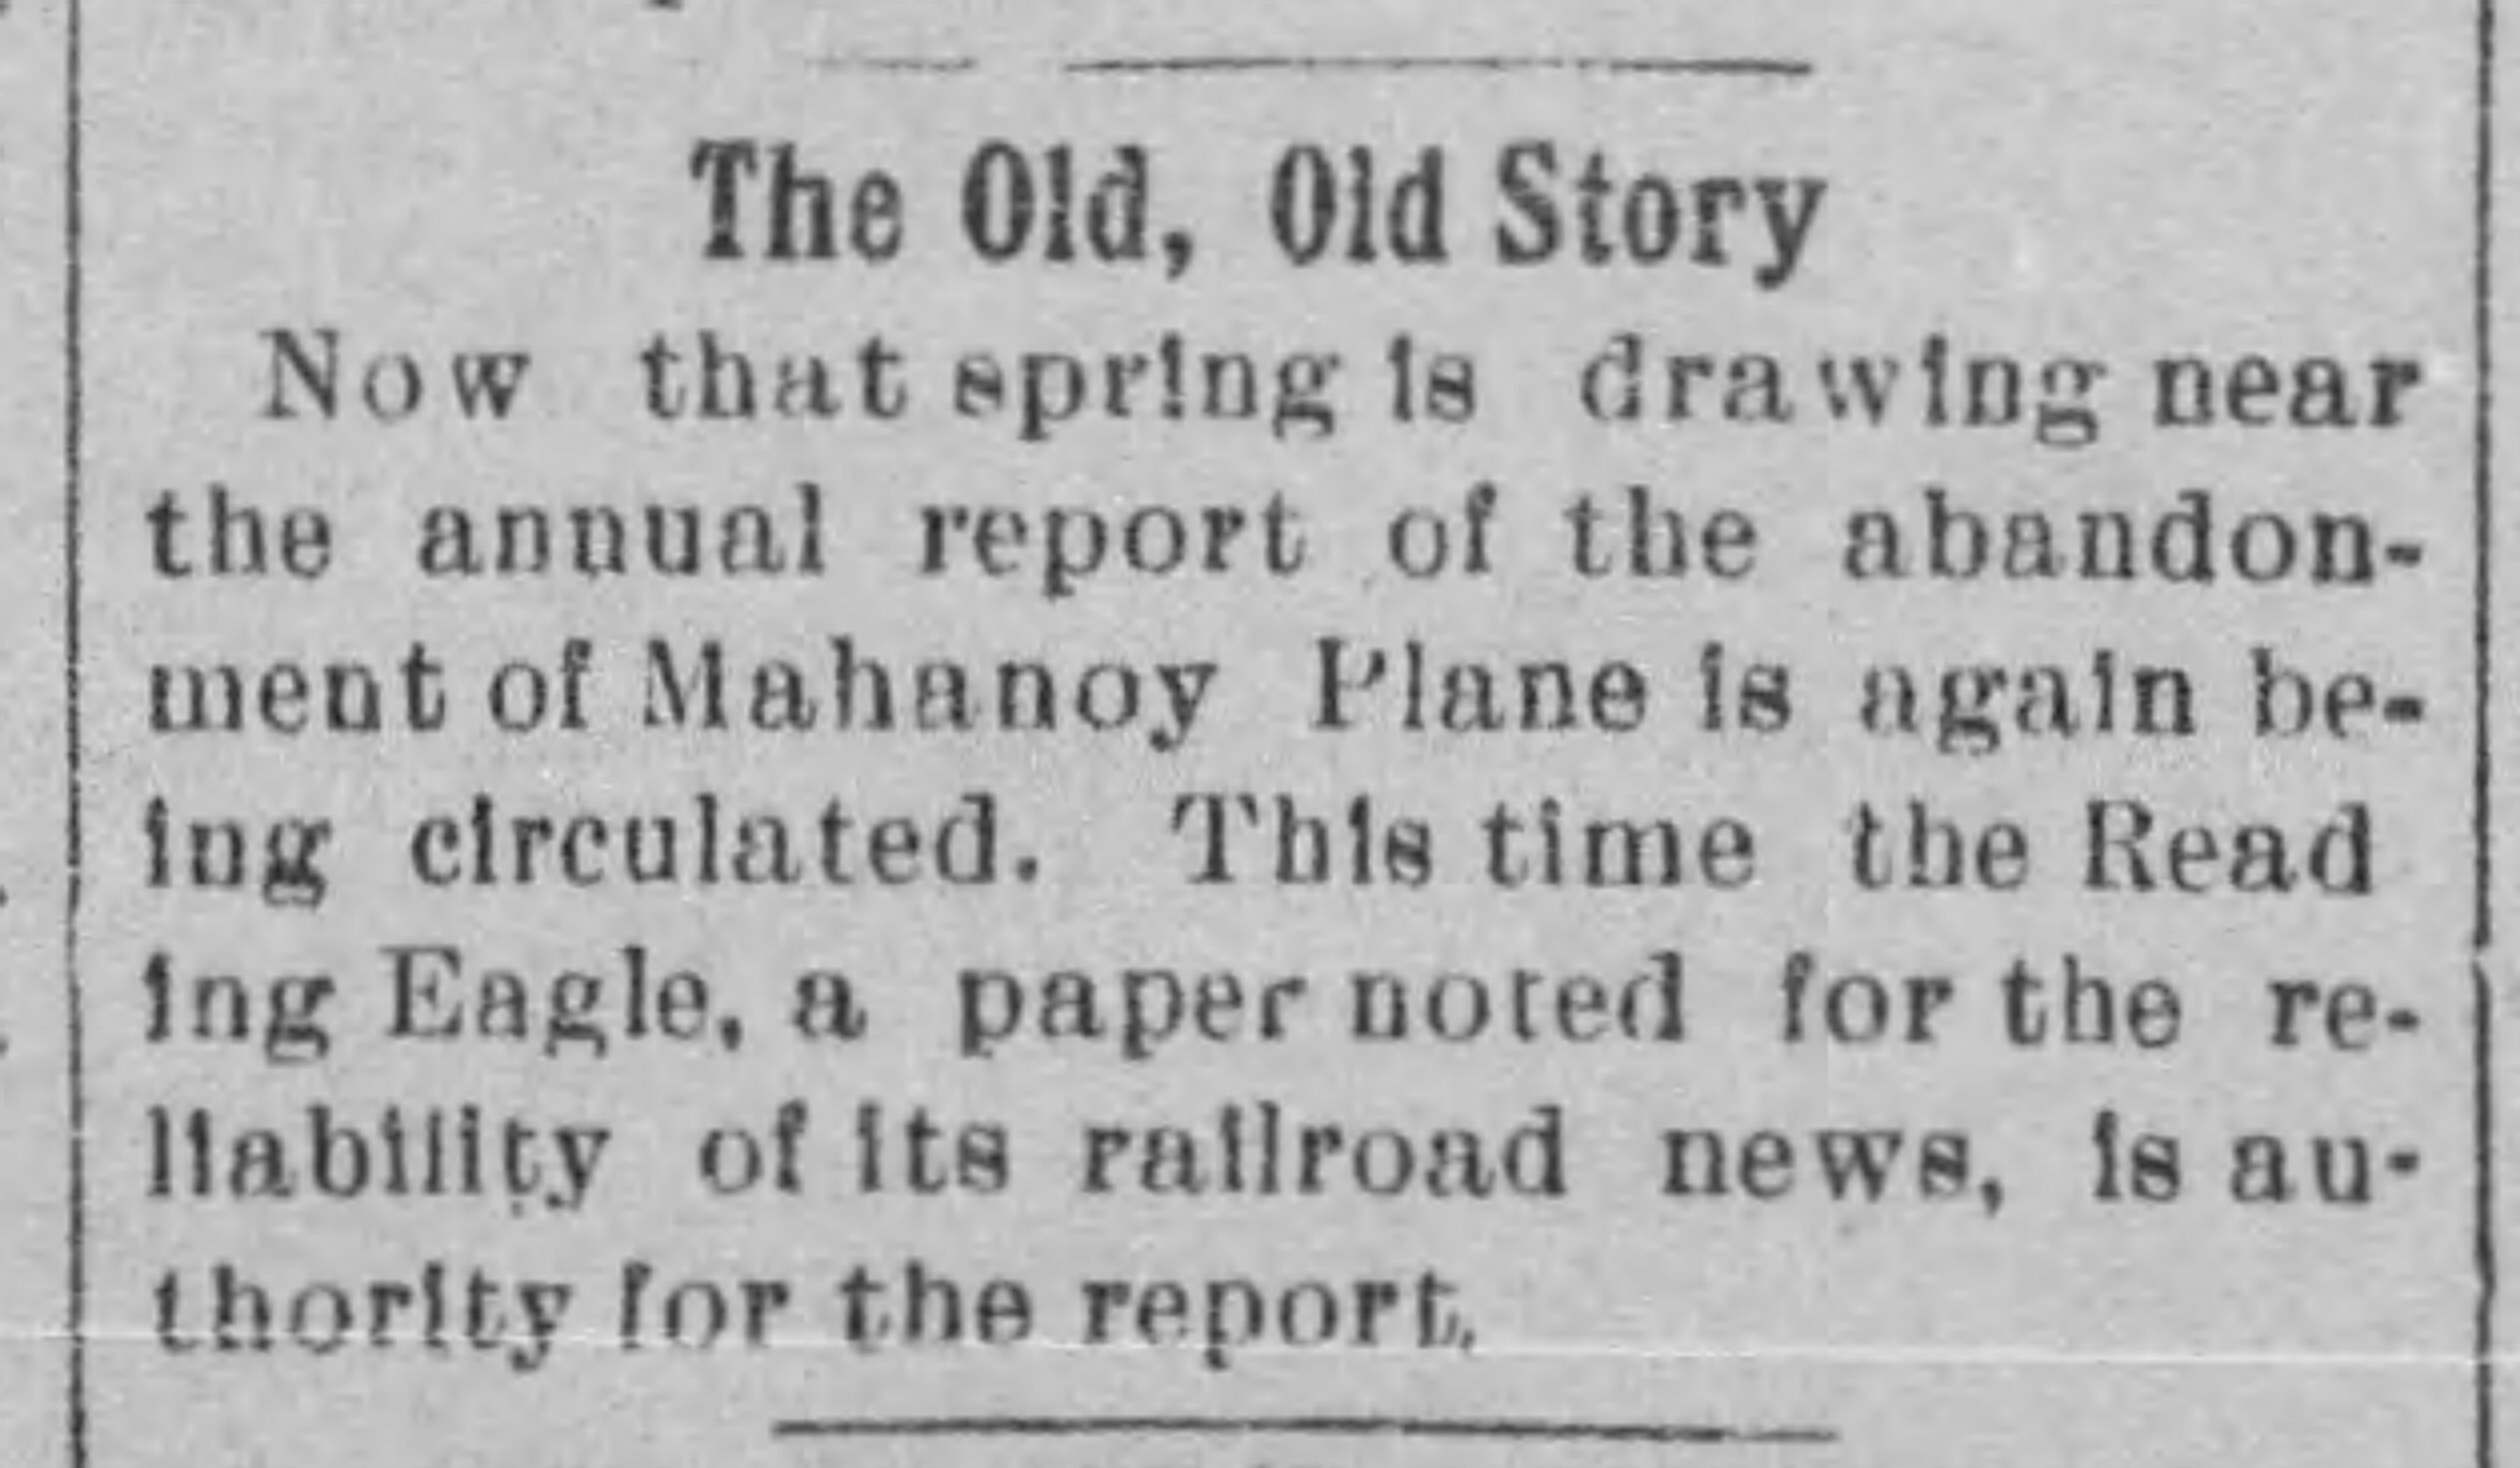 This february 1906 report mentions the "annual" rumor of the Mahanoy Plane shutting down.